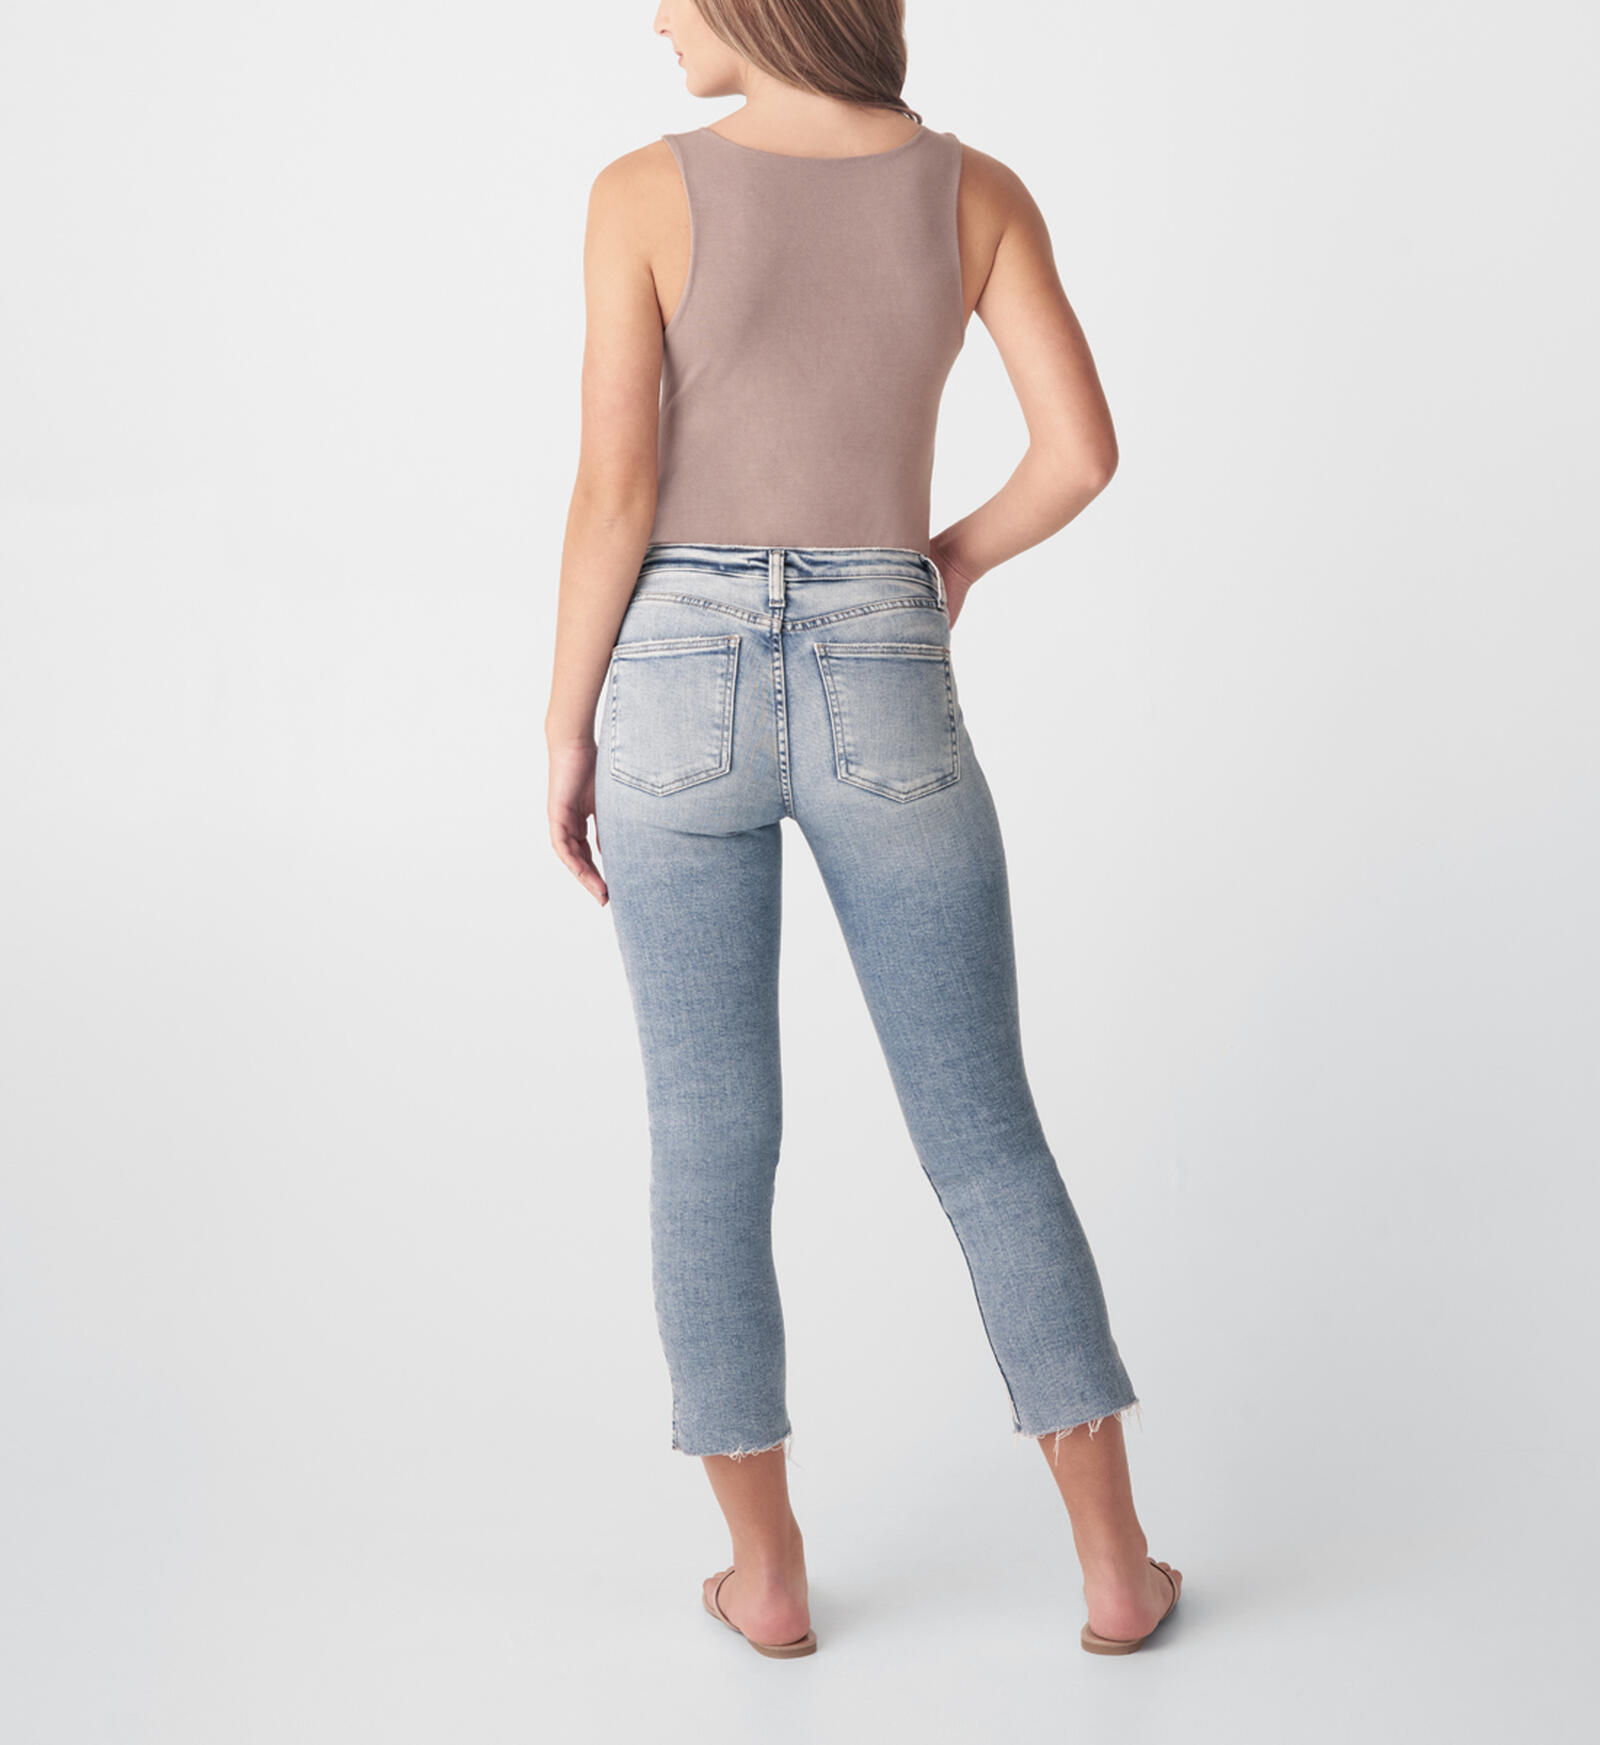 Silver Jeans Co. Most Wanted Mid Rise Straight Leg Jeans - 20873216